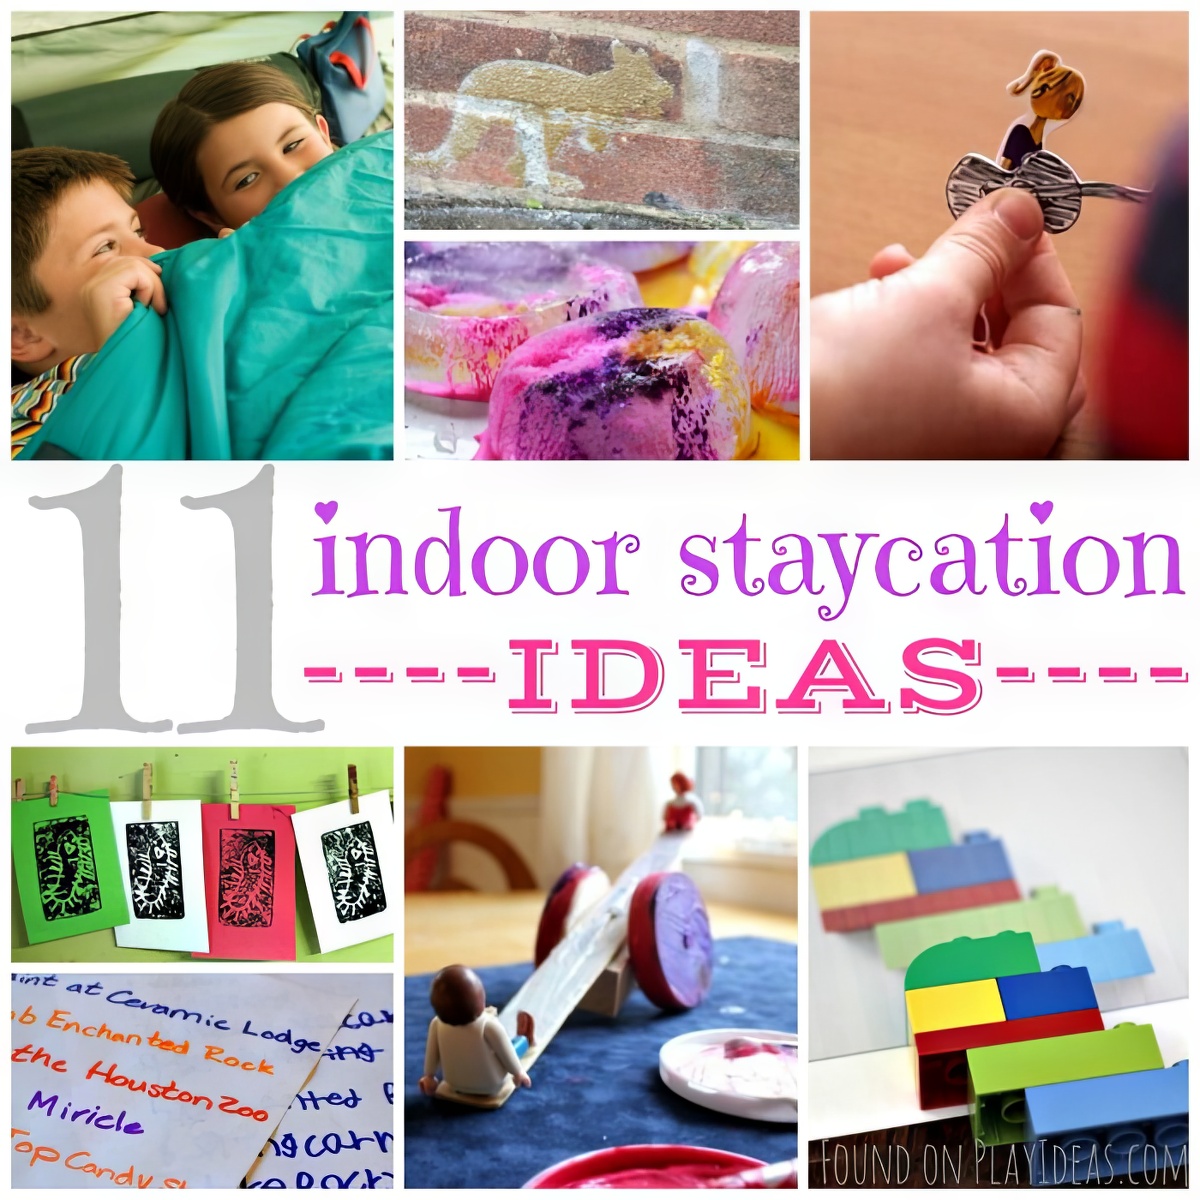 Make use of these list of Indoor Staycation Fun Ideas for the coming weekend!